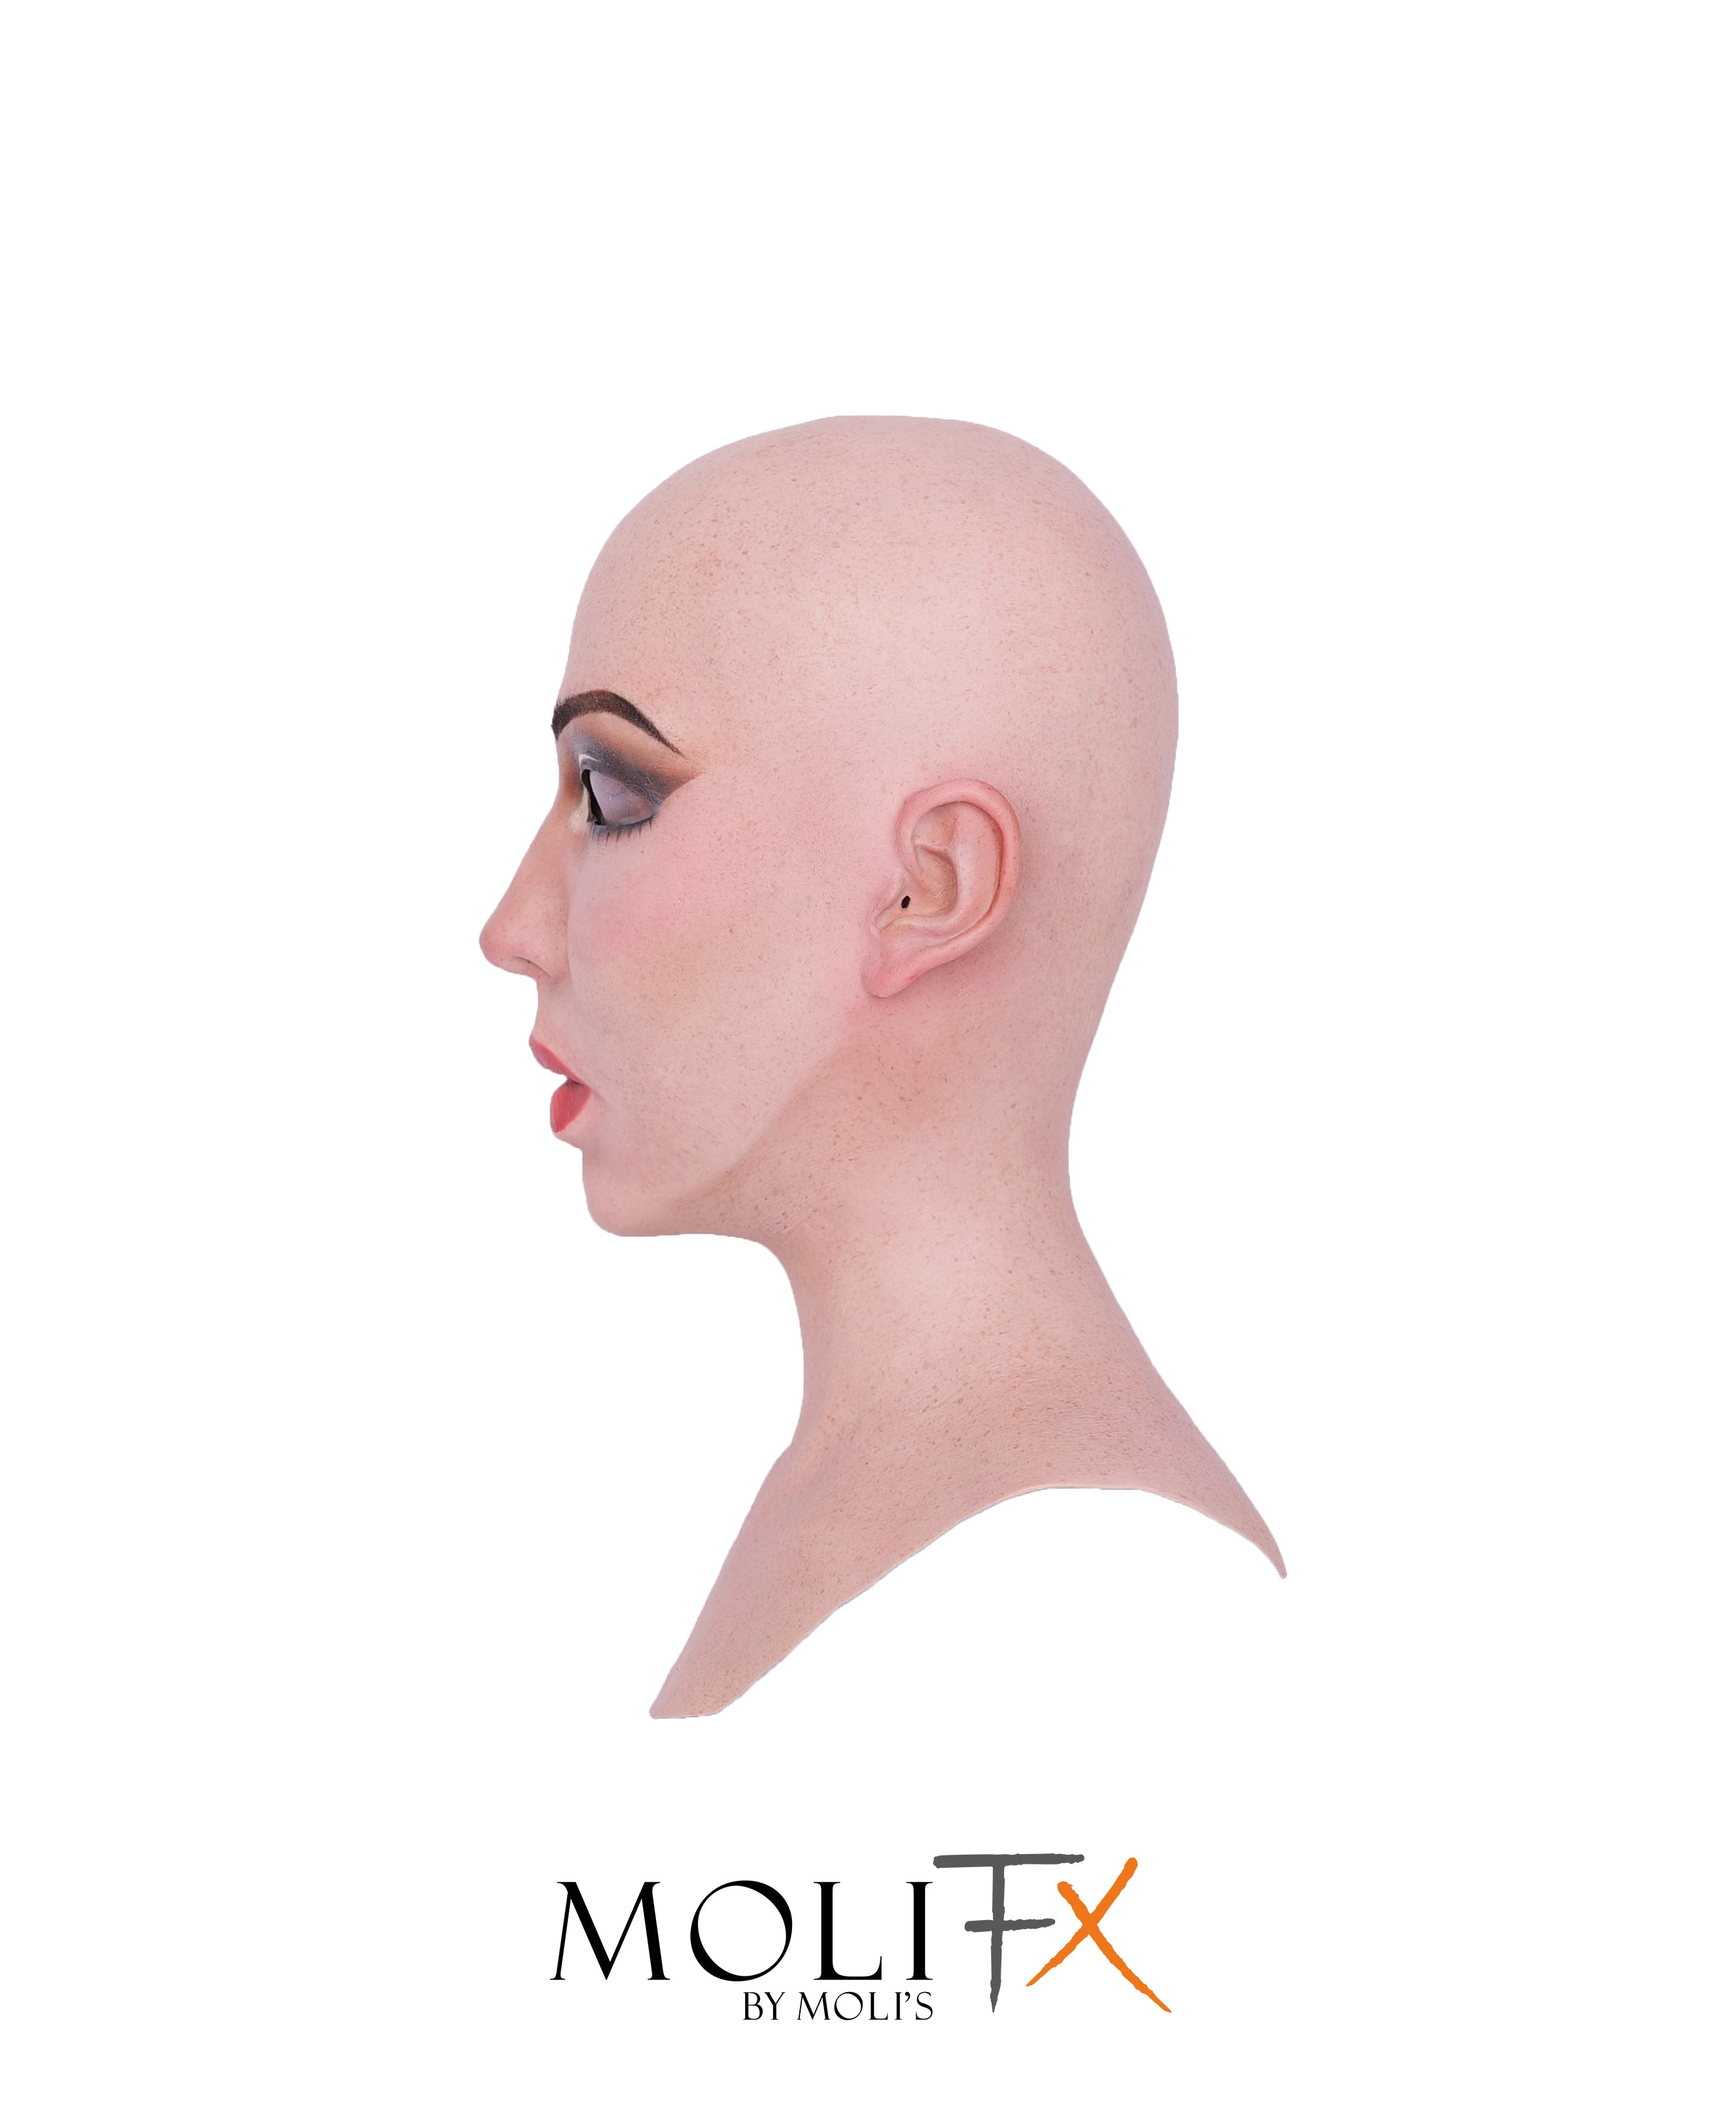 MoliFX | Molly S “Xmas Limited” Makeup Style Silicone Female Mask SFX Class